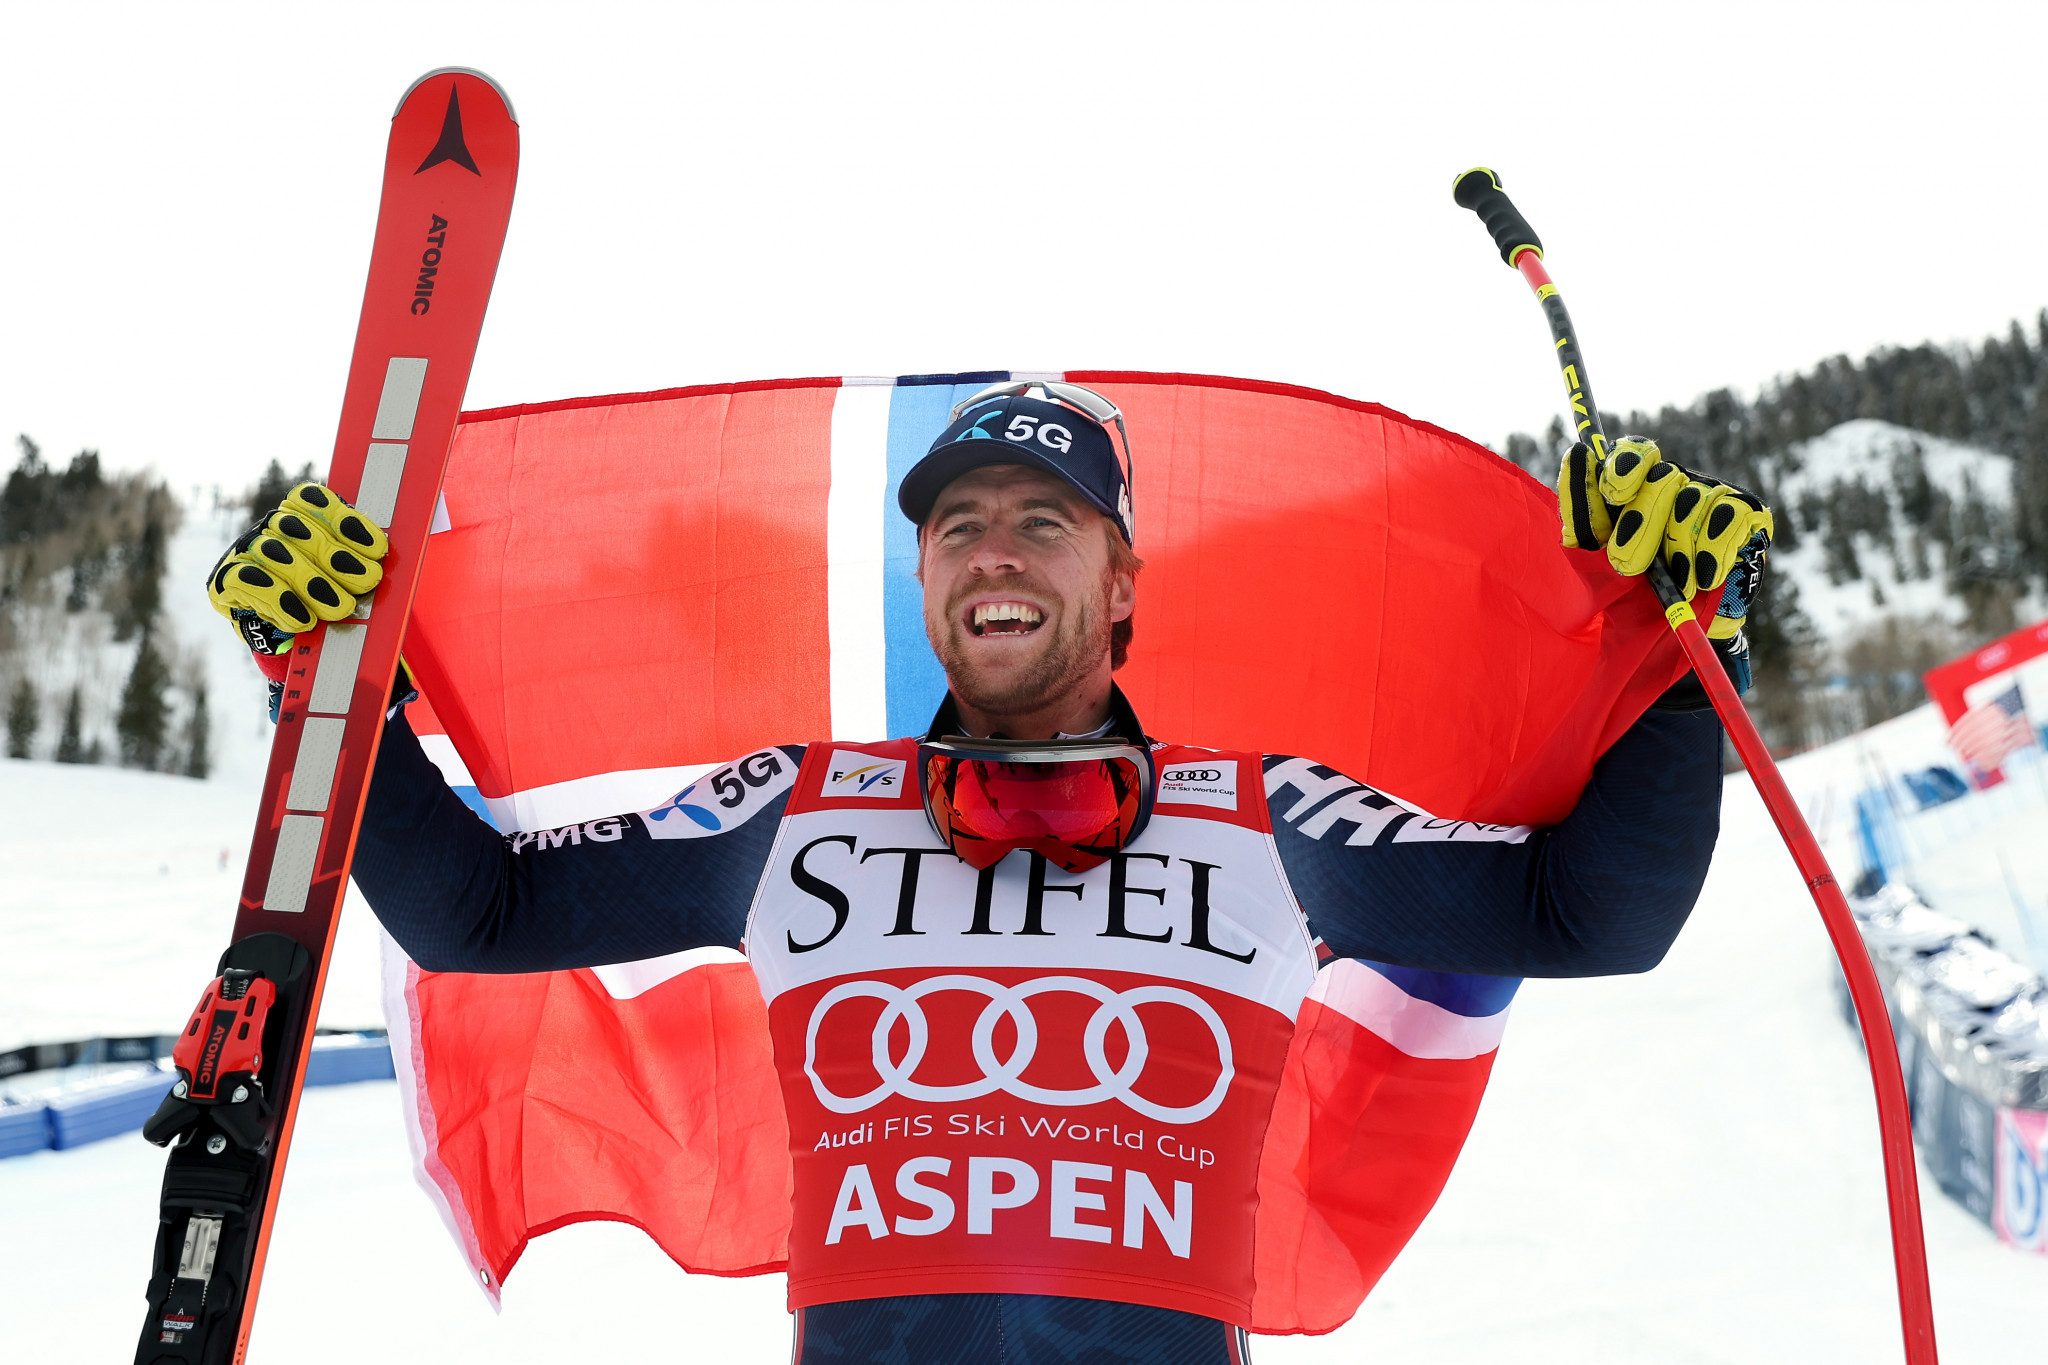 Aleksander Aamodt Kilde of Norway added yet another FIS Alpine Ski World Cup title by claiming the downhill gold in Aspen ©Getty Images